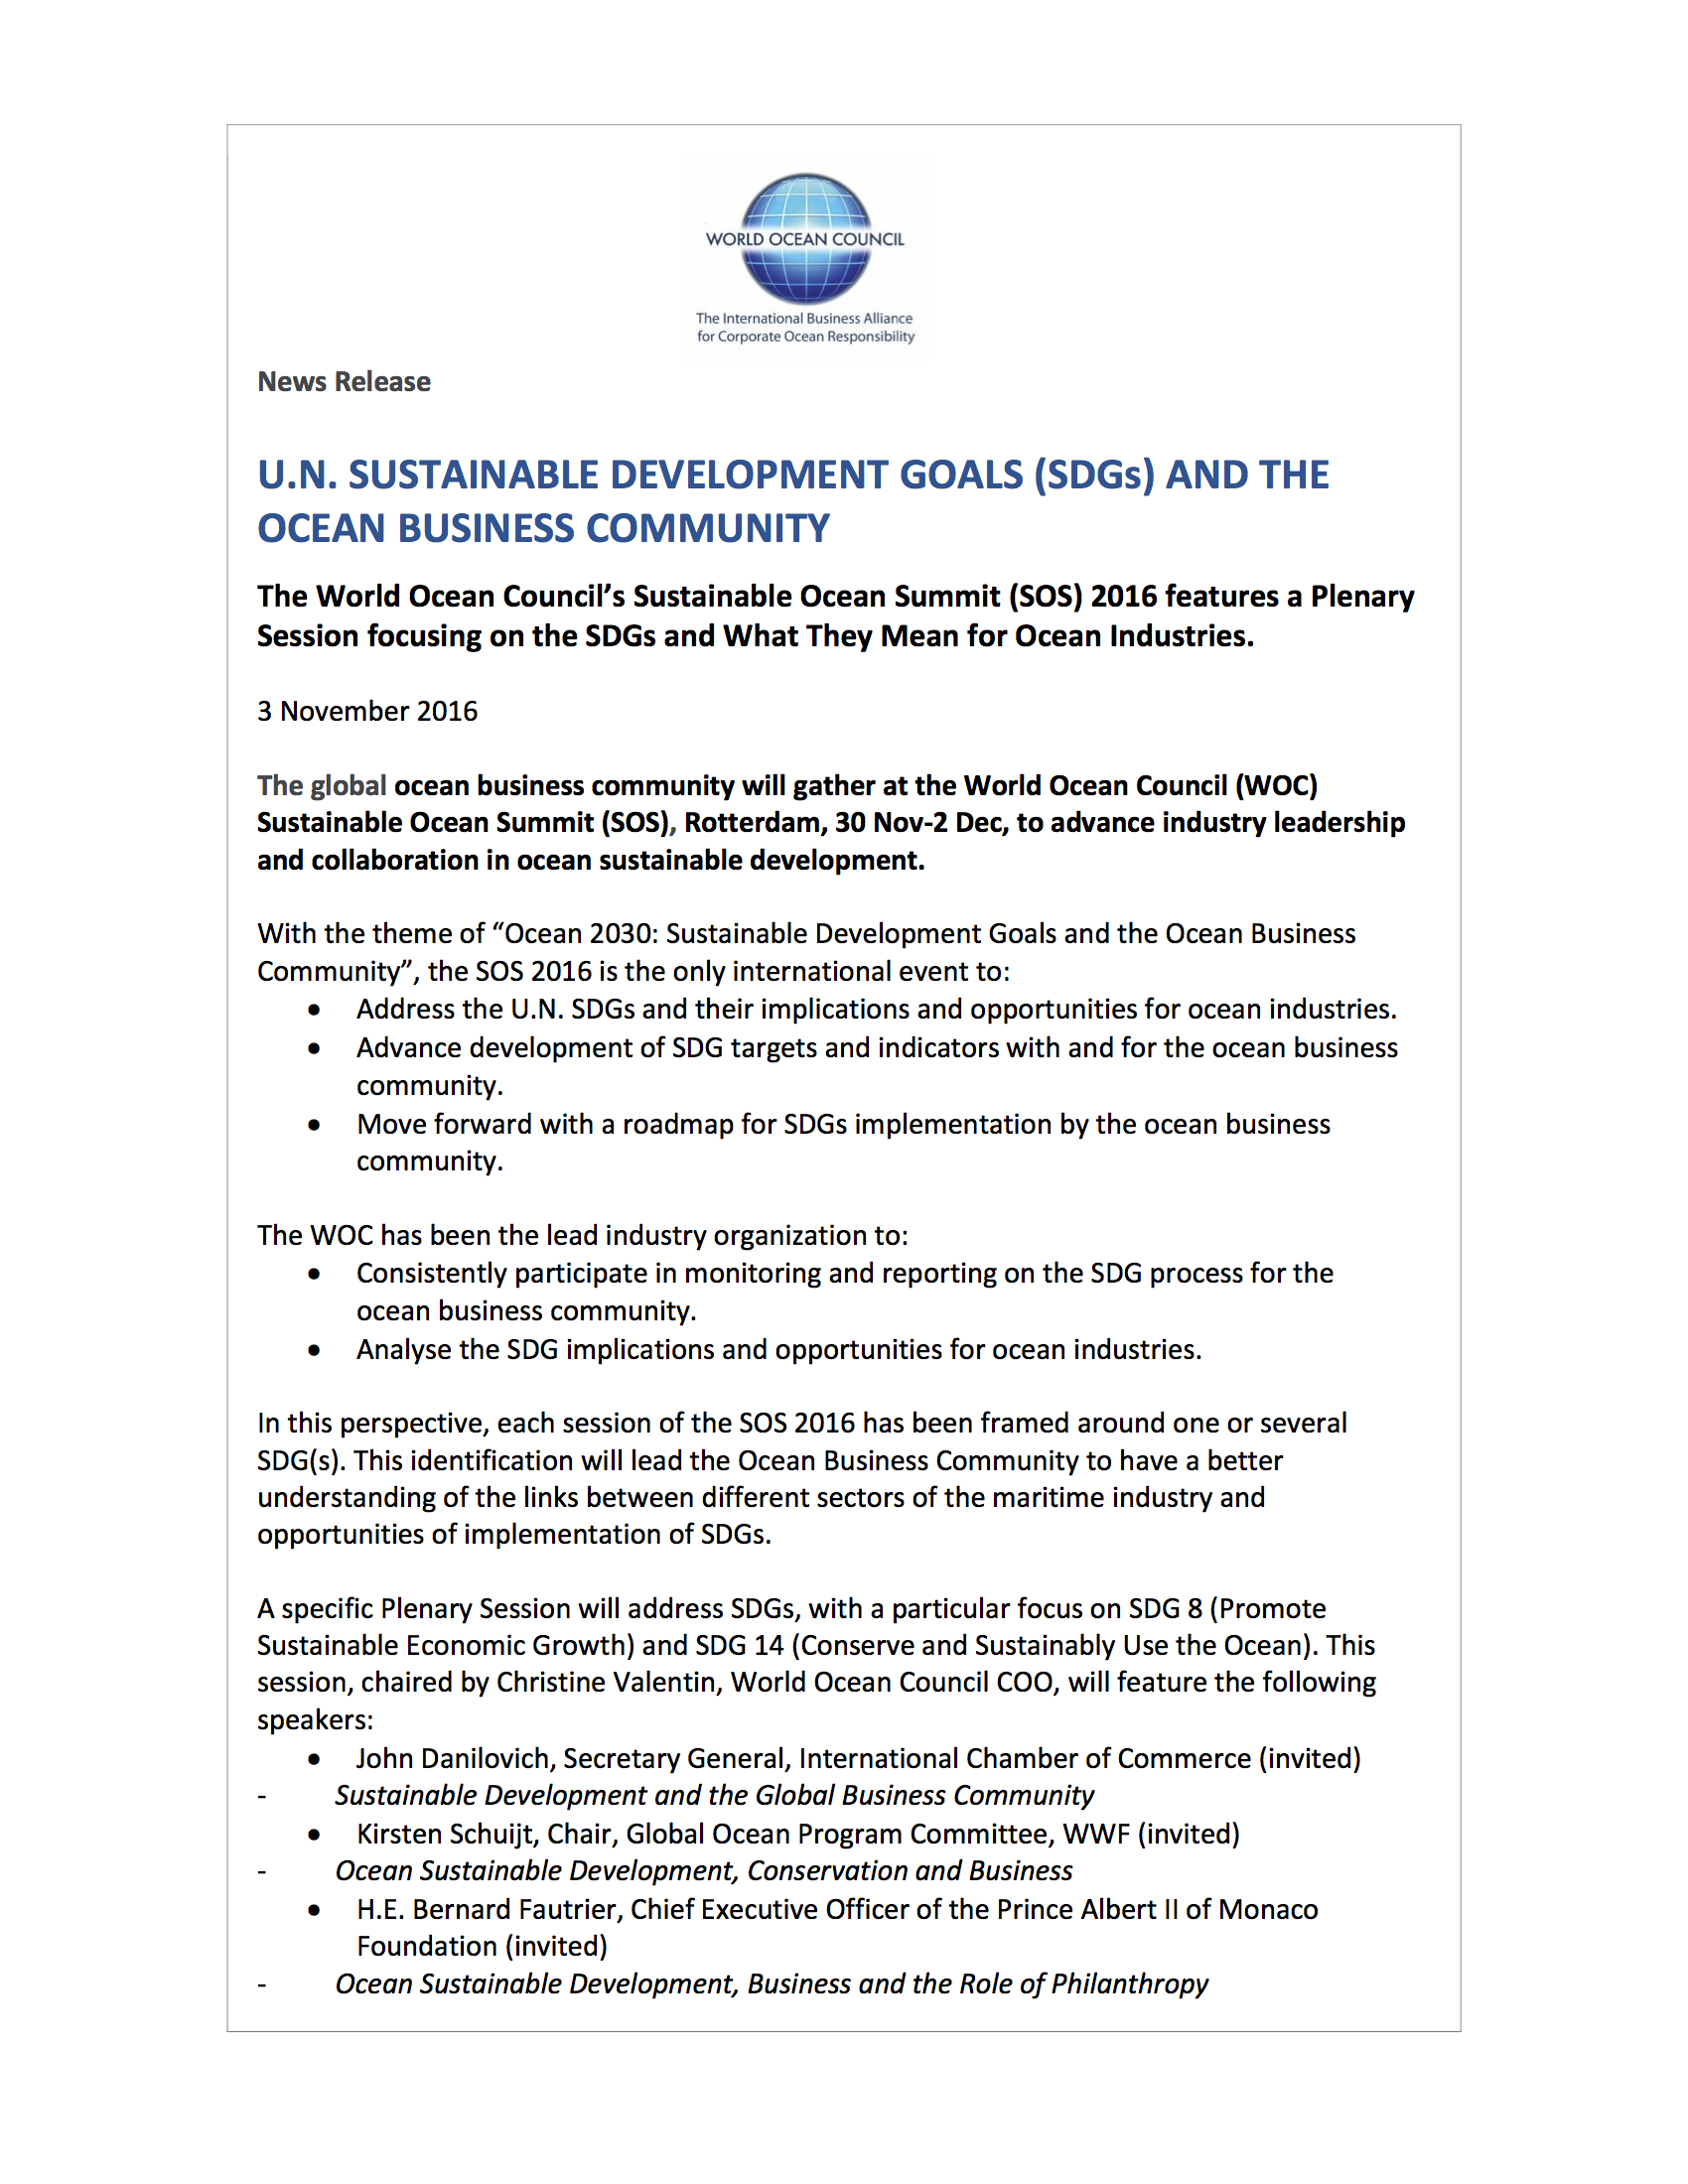 WOC-News-Release-2016-11-03-SOS-2016-to-Focus-on-Sustainable-Development-Goals